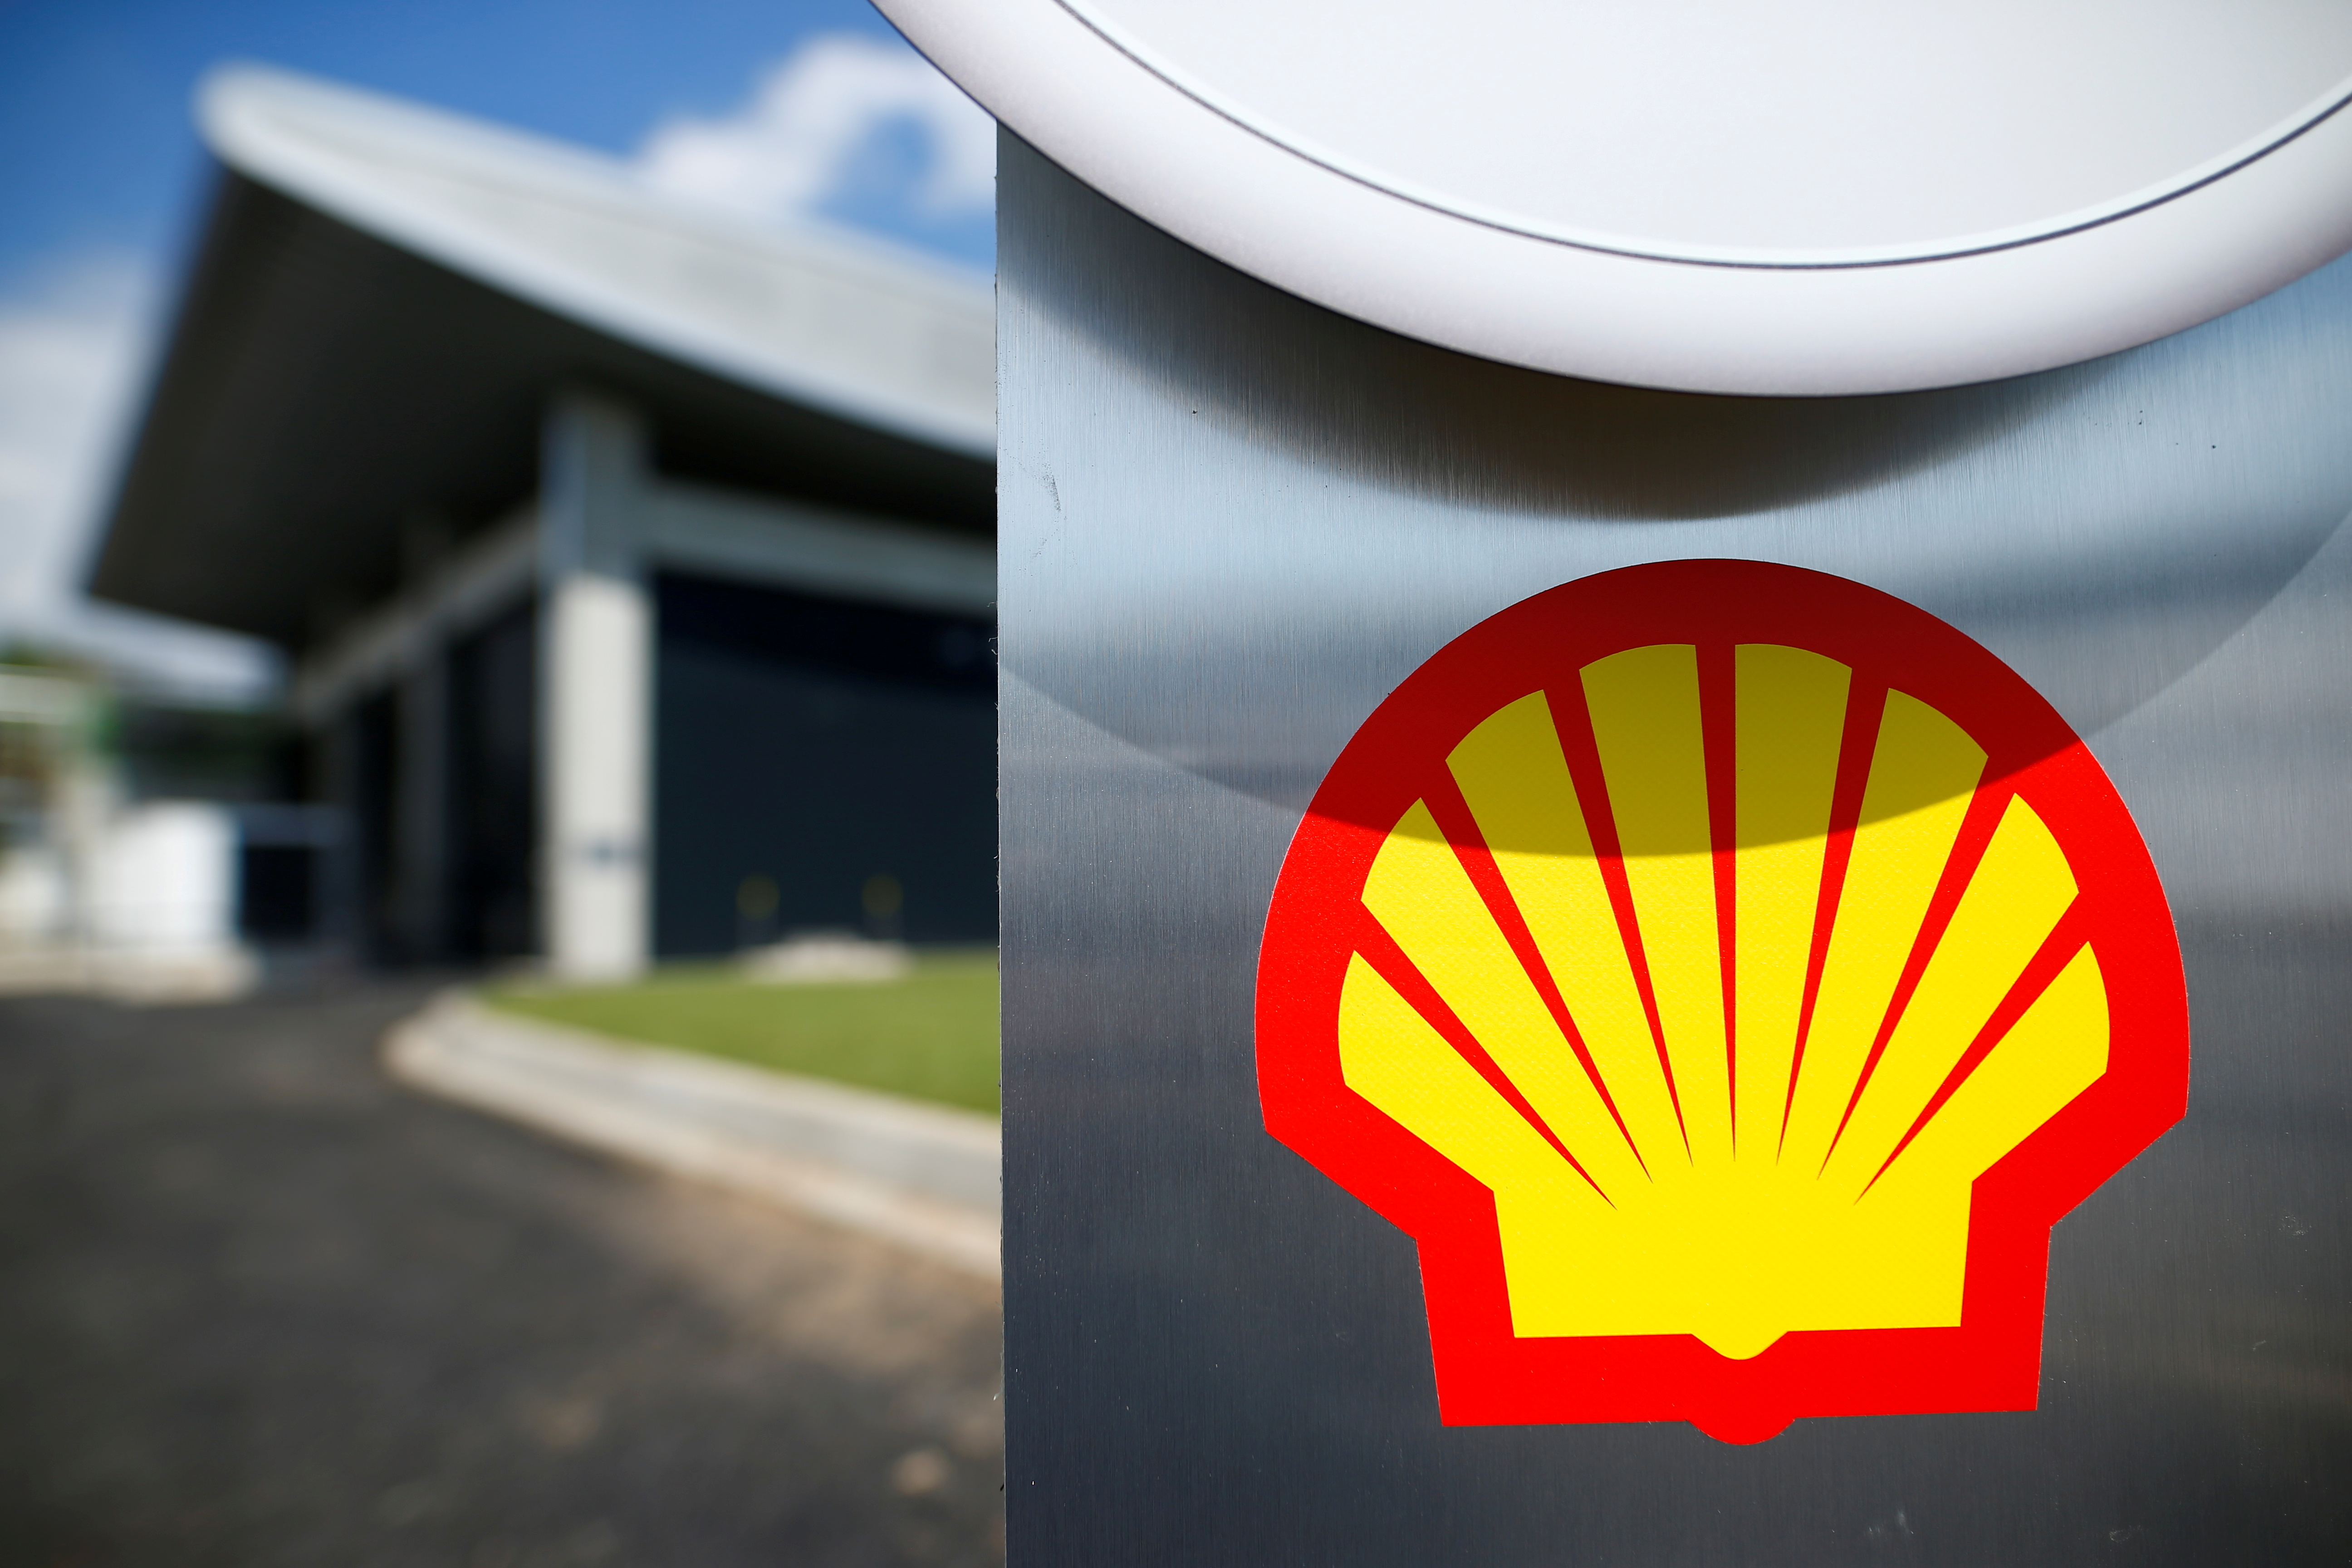 The logo of Royal Dutch Shell is pictured during a launch event for a hydrogen electrolysis plant at Shell's Rhineland refinery in Wesseling near Cologne, Germany, July 2, 2021. REUTERS/Thilo Schmuelgen/File Photo